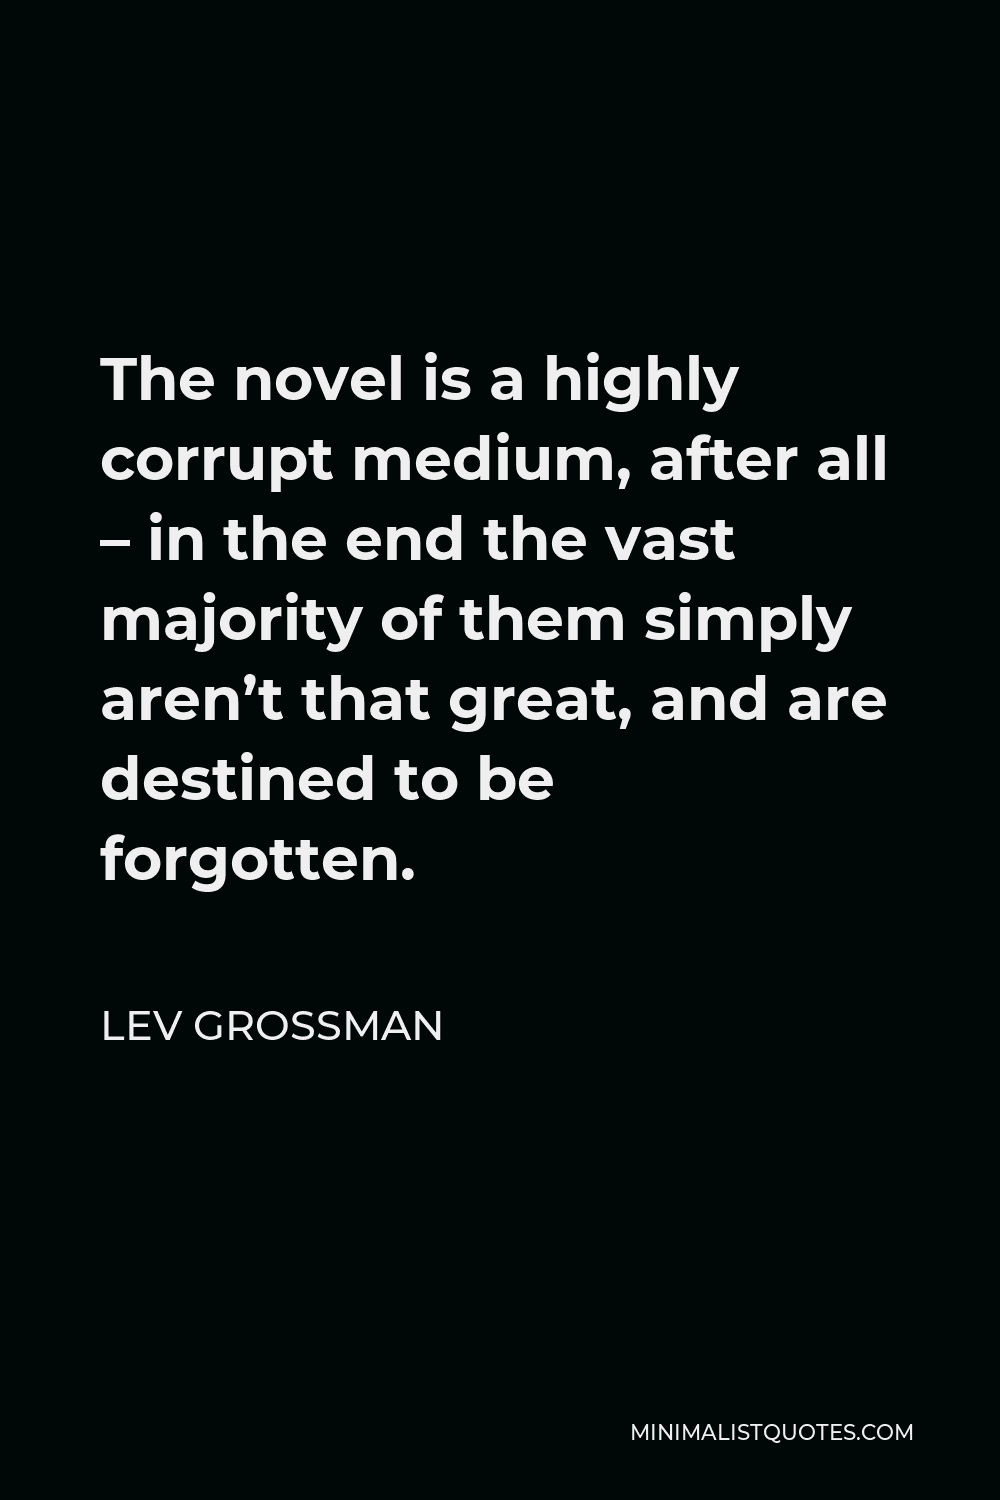 Lev Grossman Quote - The novel is a highly corrupt medium, after all – in the end the vast majority of them simply aren’t that great, and are destined to be forgotten.